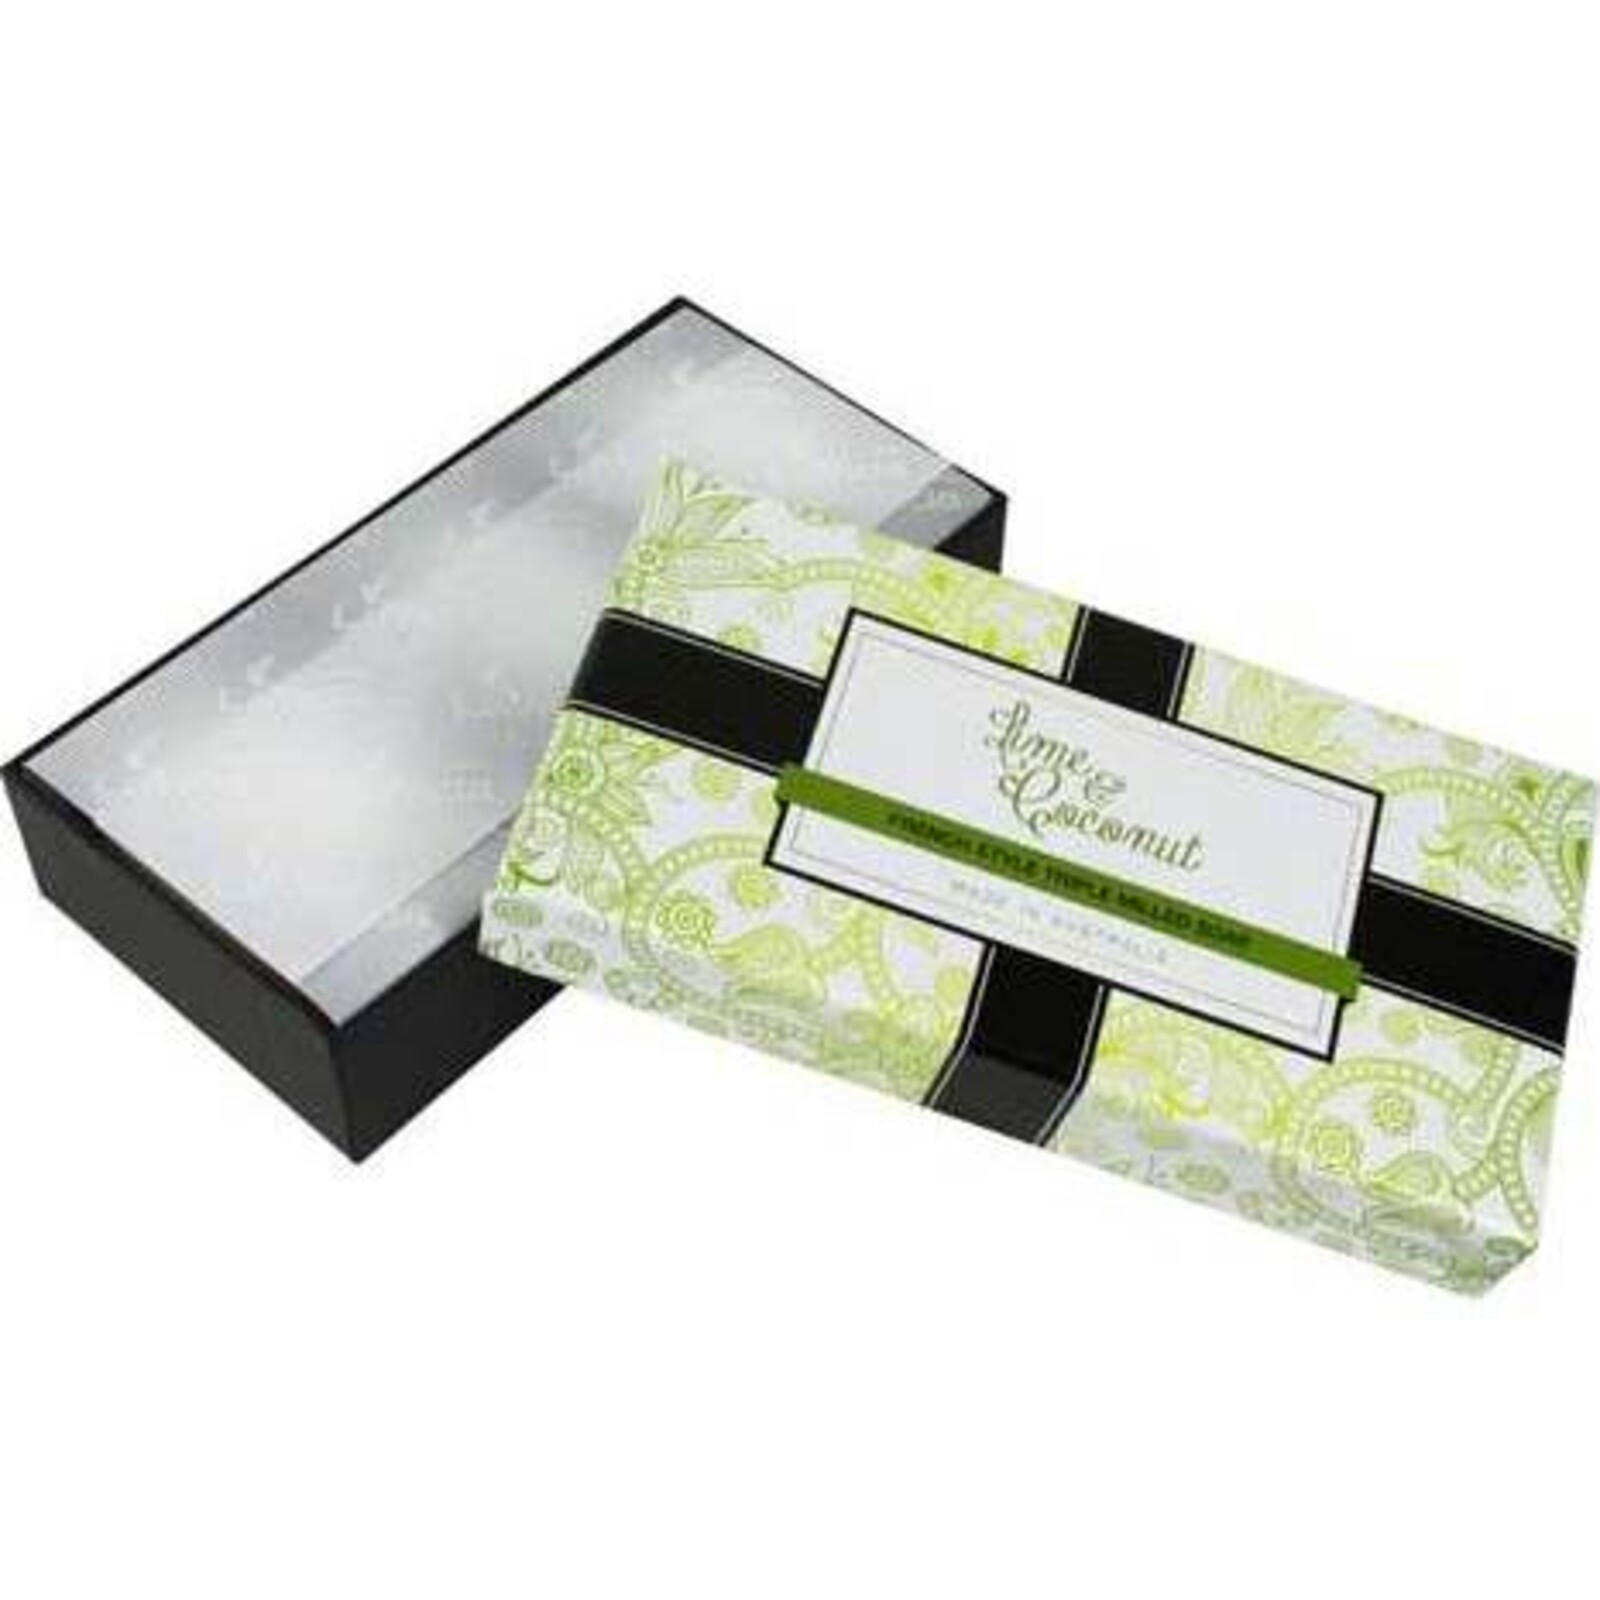 Lime and Coconut Boxed Soap S/3 